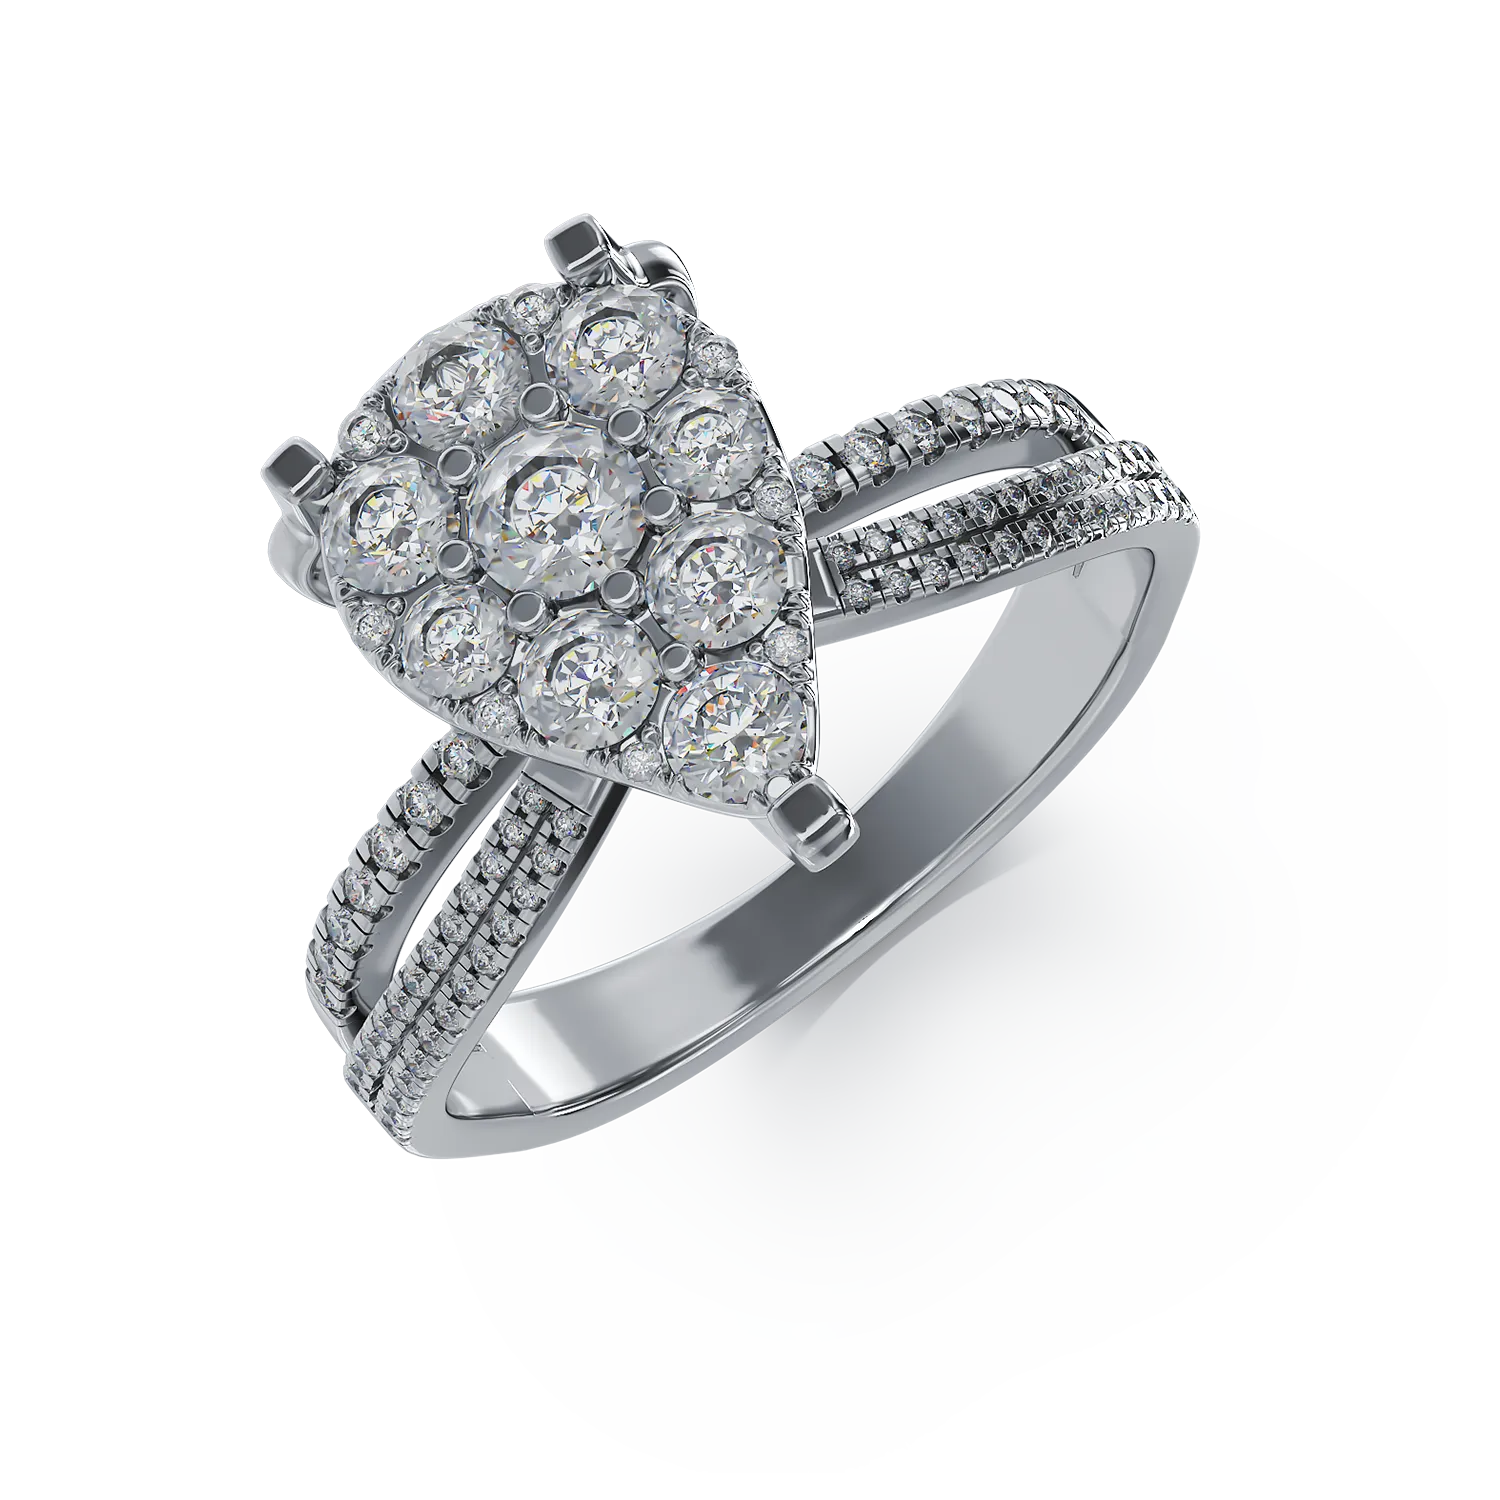 18K white gold engagement ring with 0.75ct diamonds